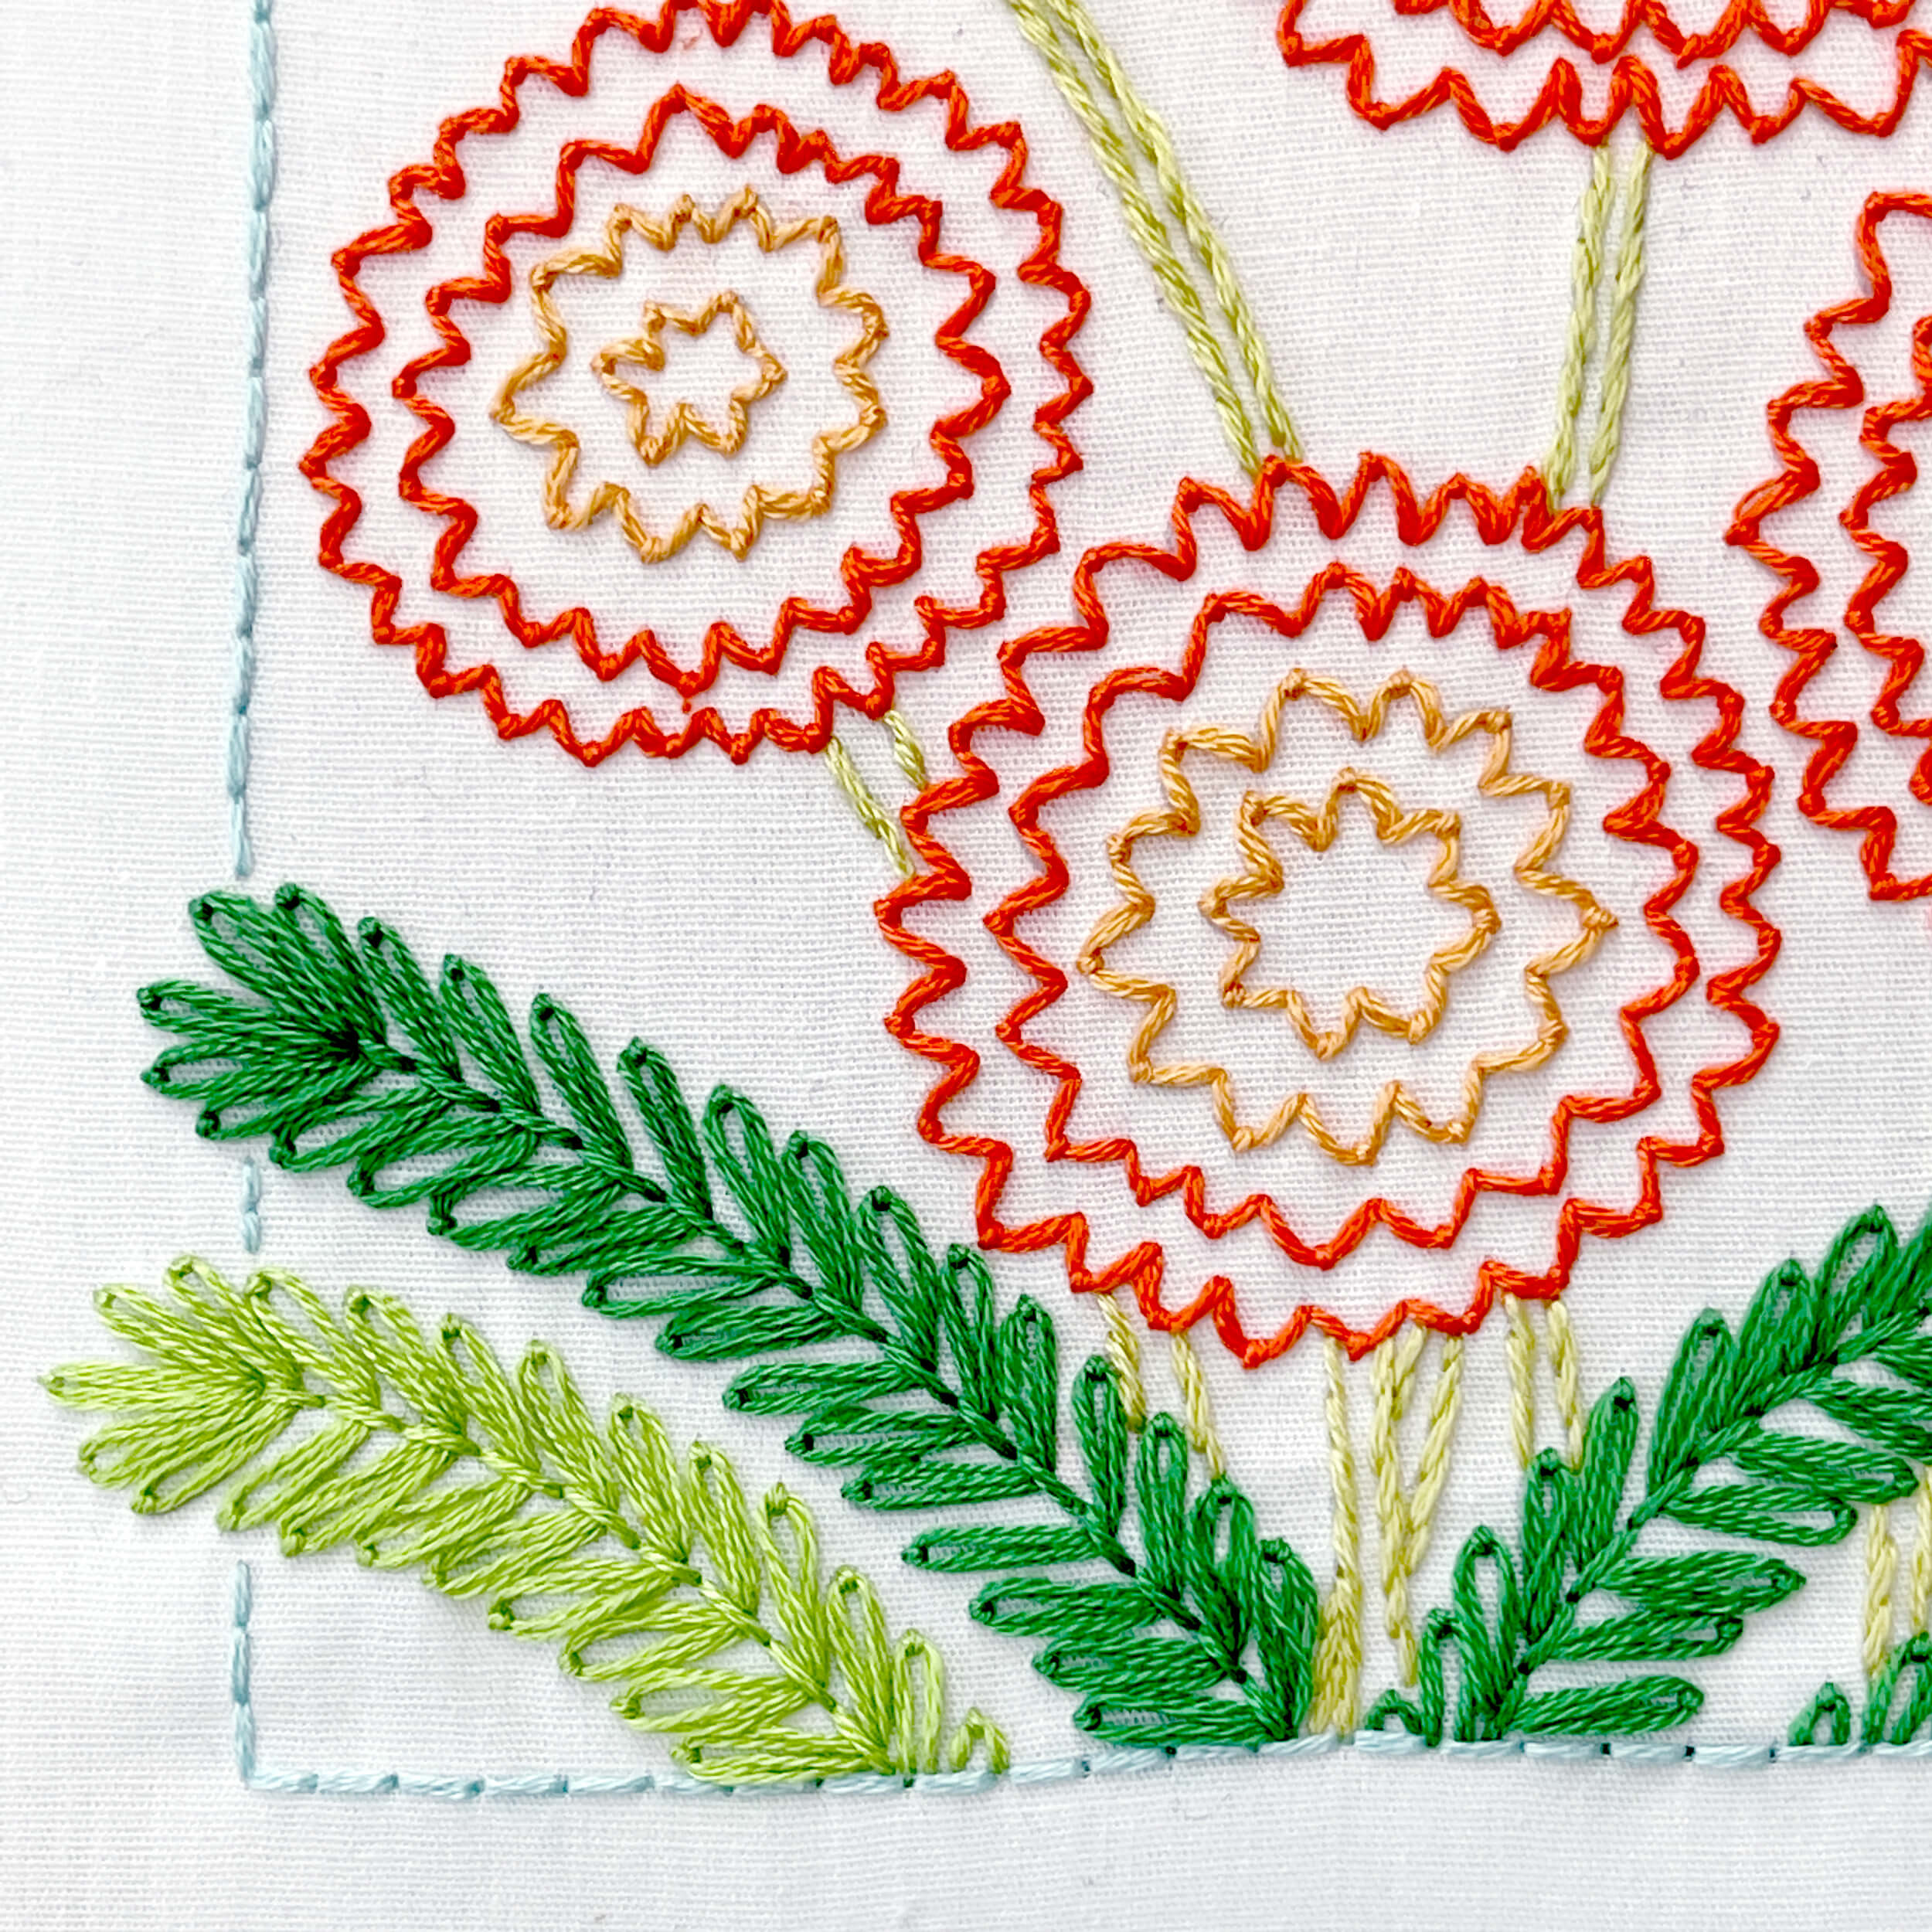 backstitch outline and marigold flower and leafs